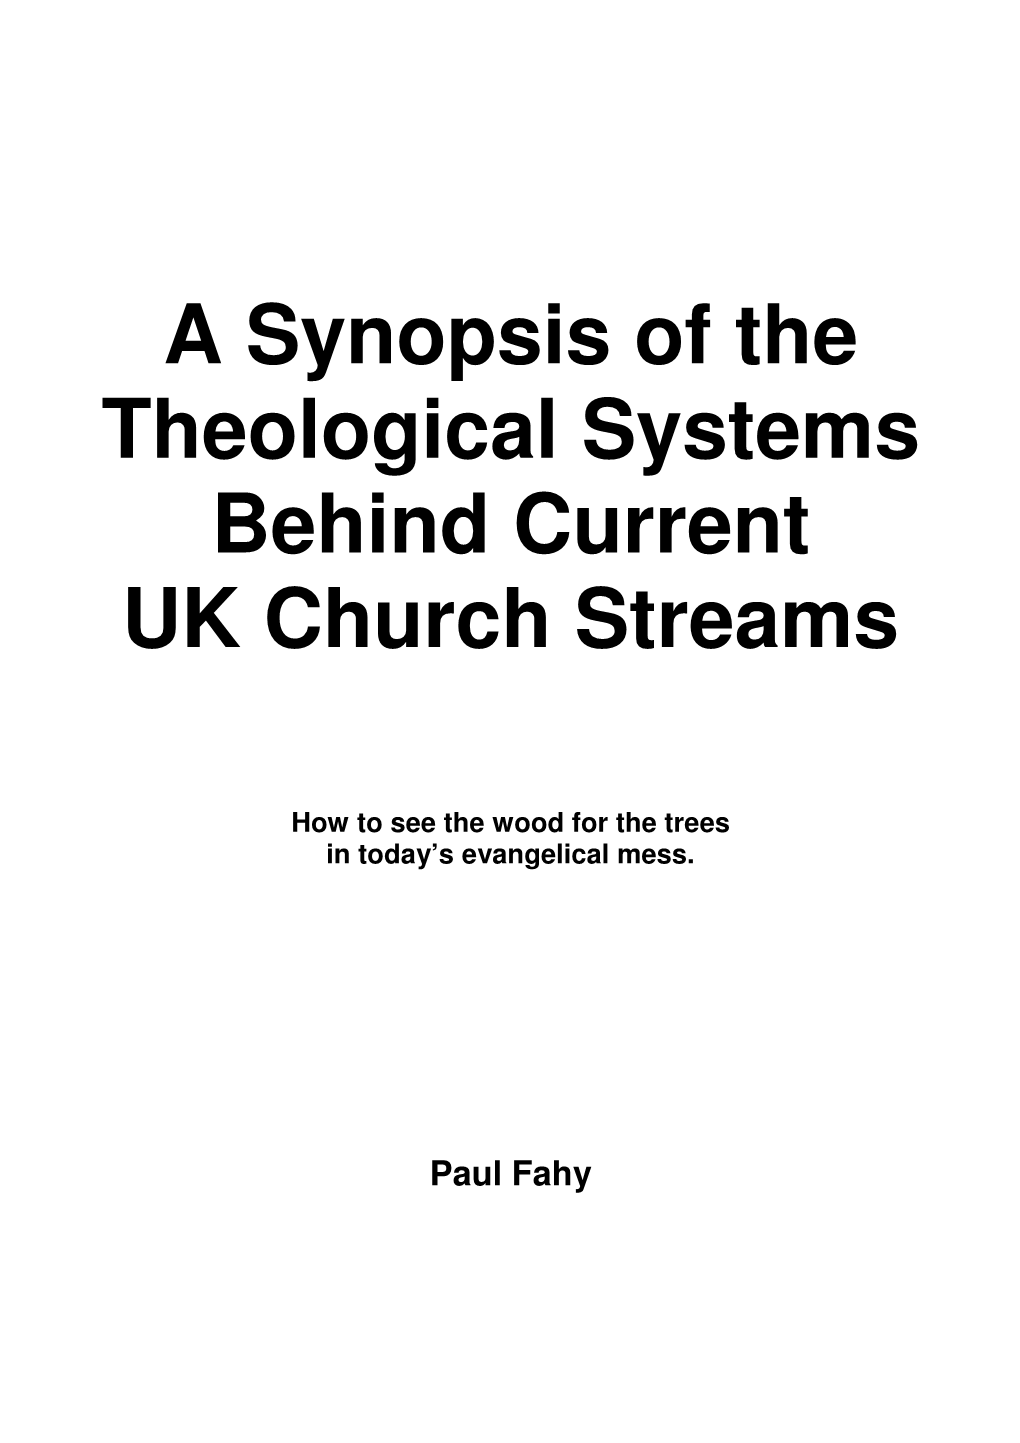 A Synopsis of the Theological Systems Behind Current UK Church Streams